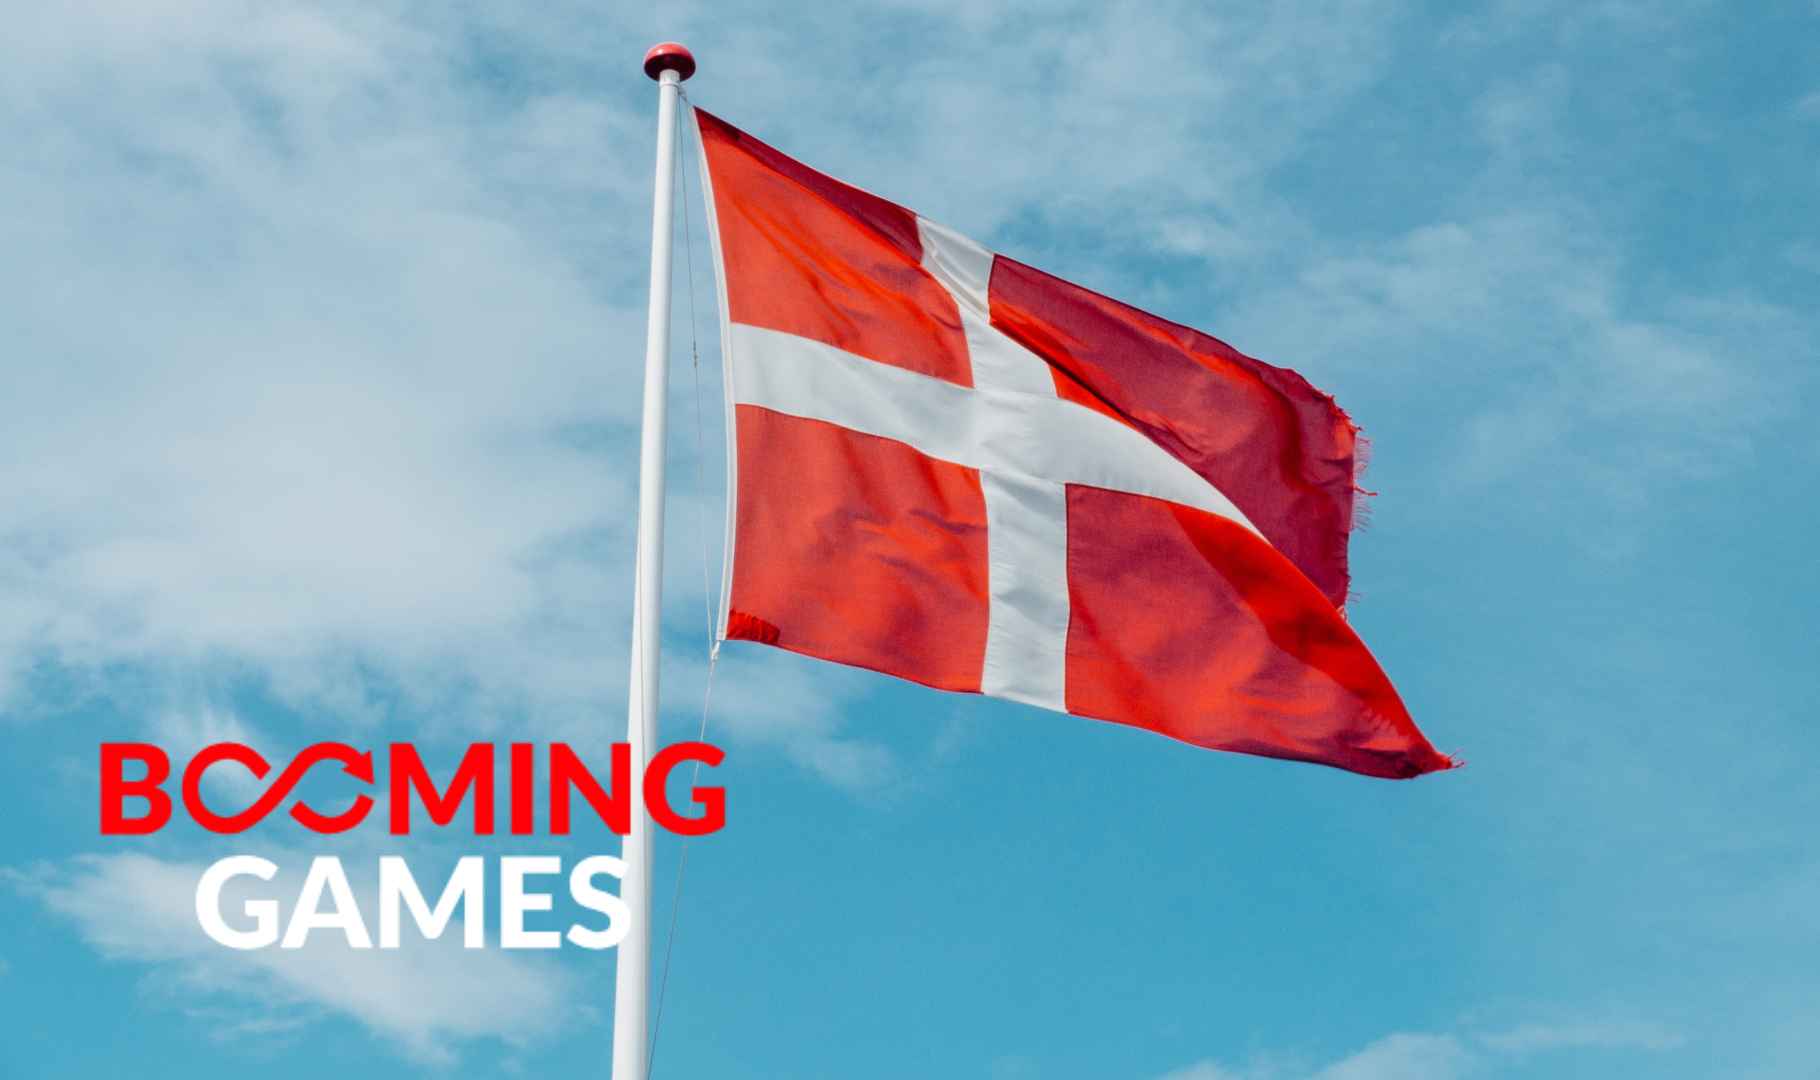 booming games gets into the danish market